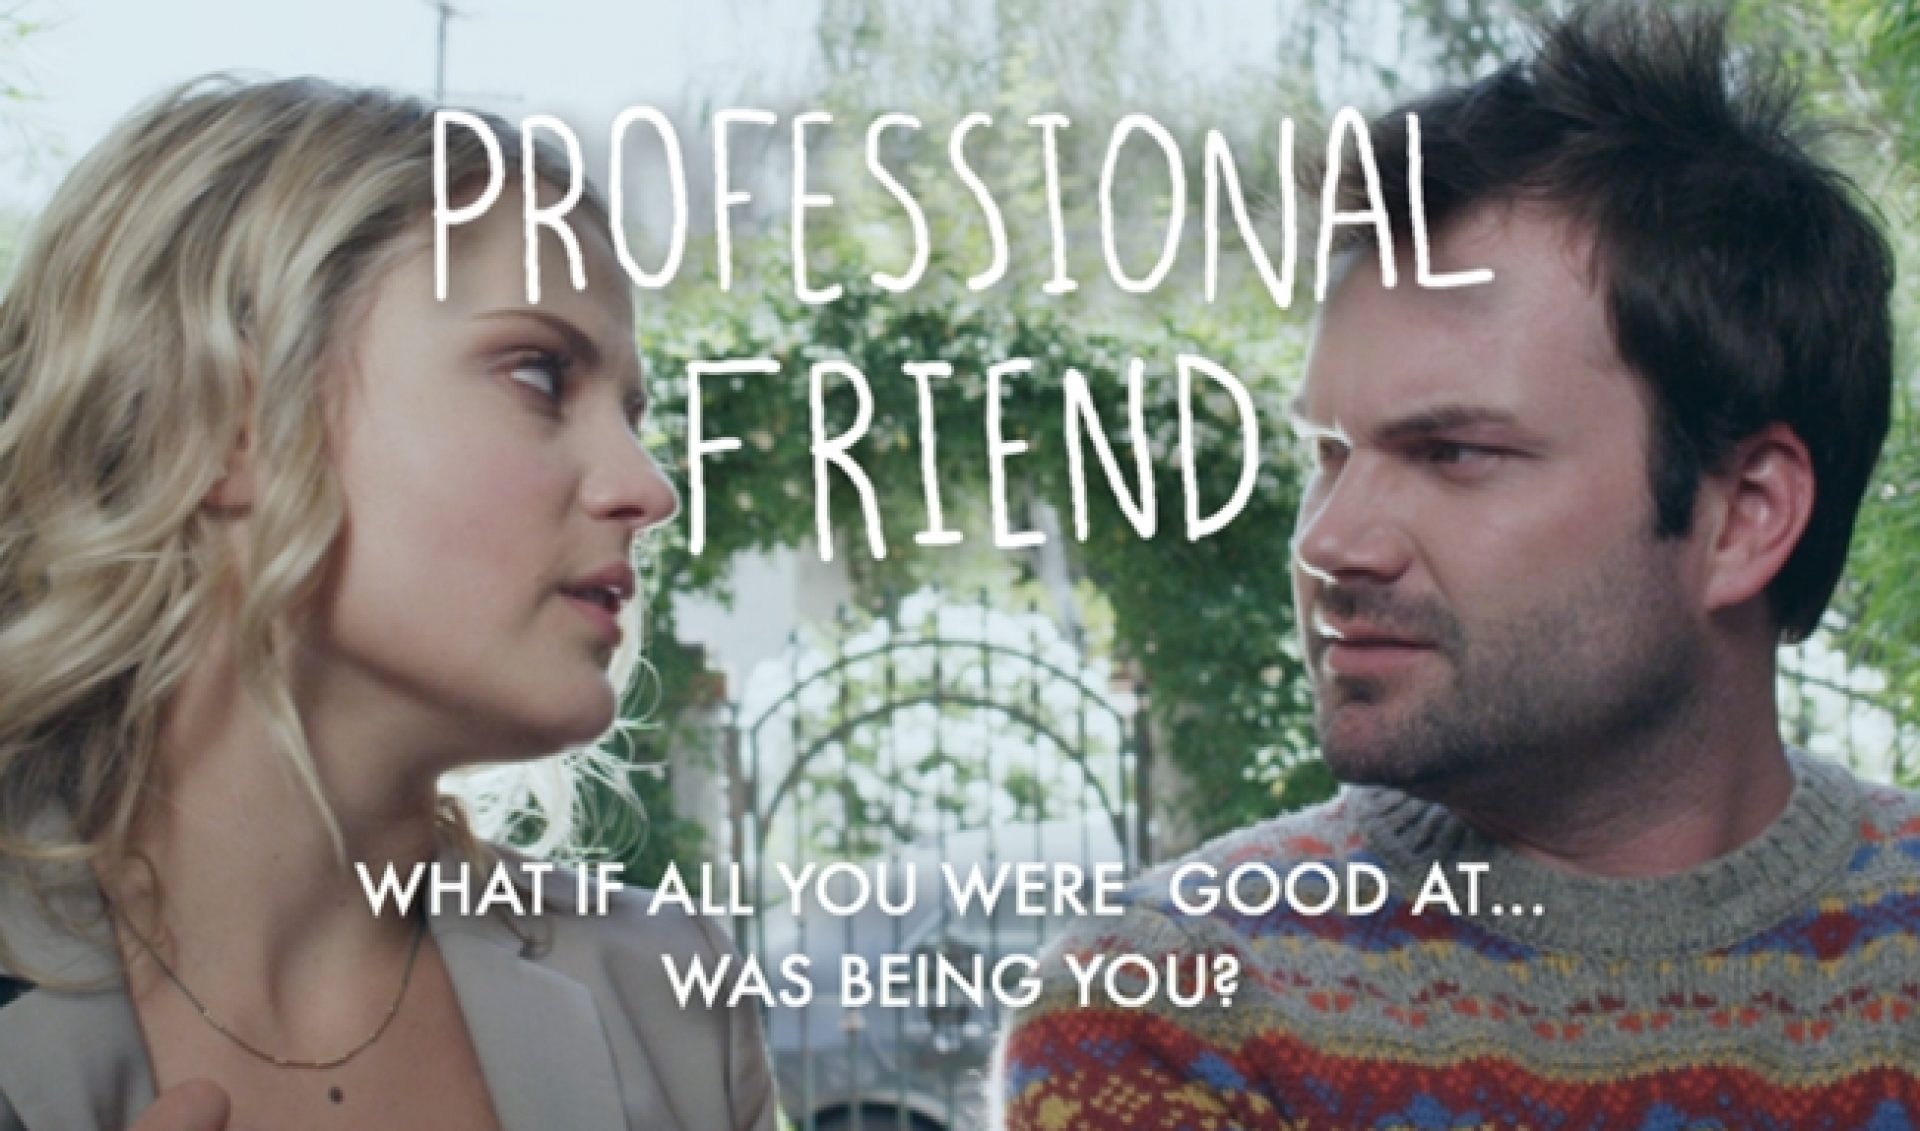 Indie Spotlight: Twins Share The Spotlight In ‘Professional Friend’